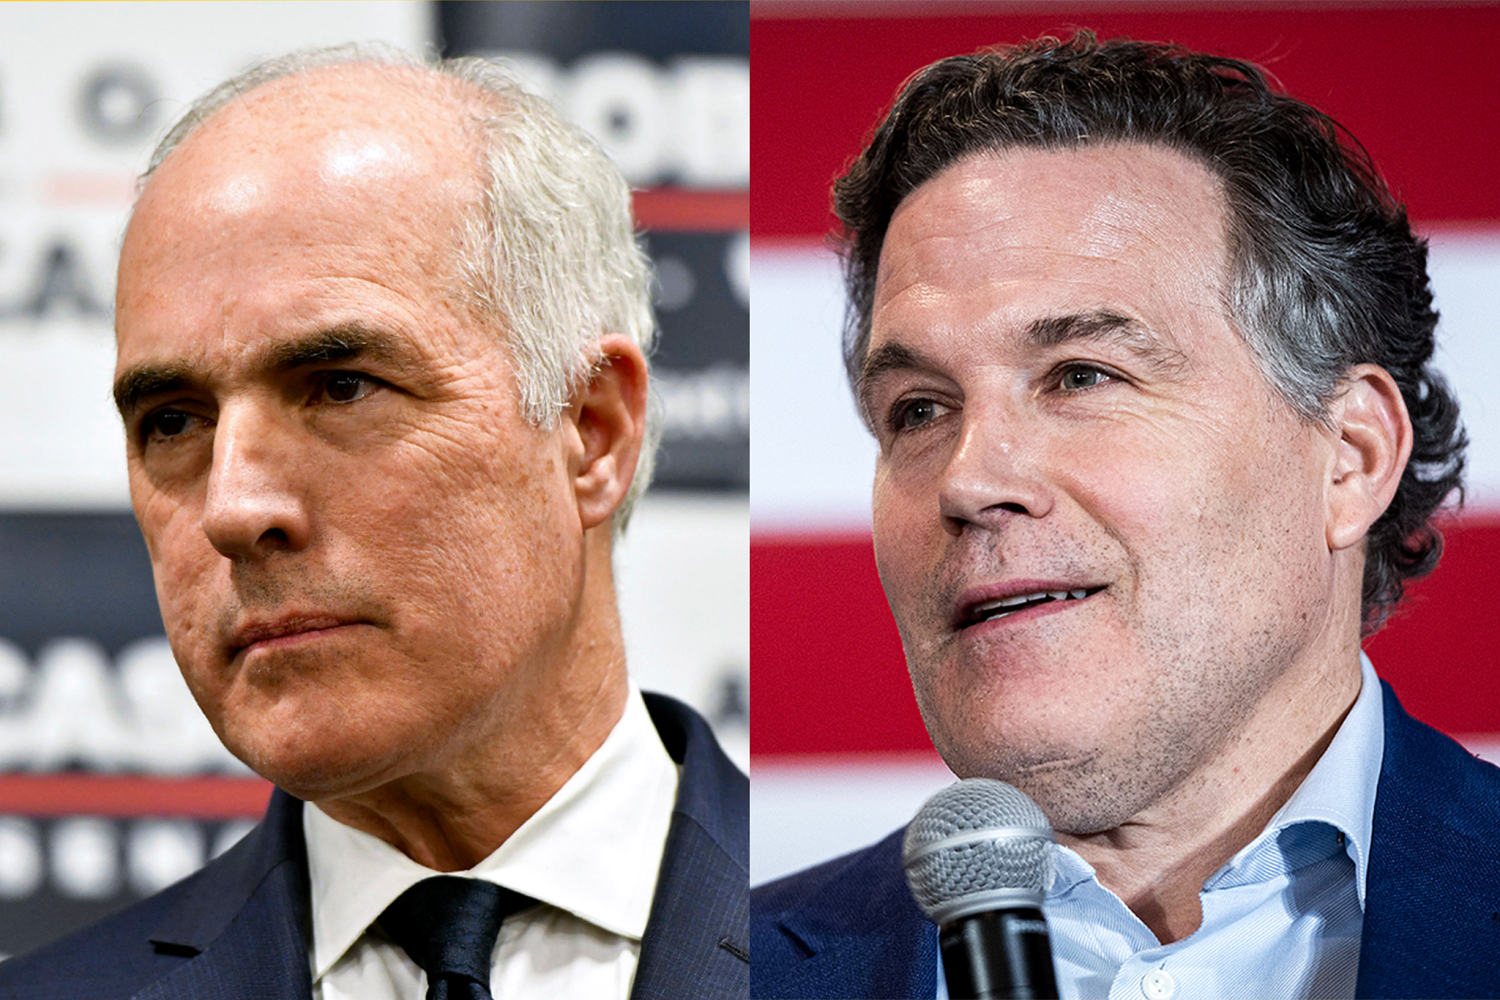 Bob Casey and Dave McCormick advance to the general election in Pennsylvania, setting up a key race for Senate control